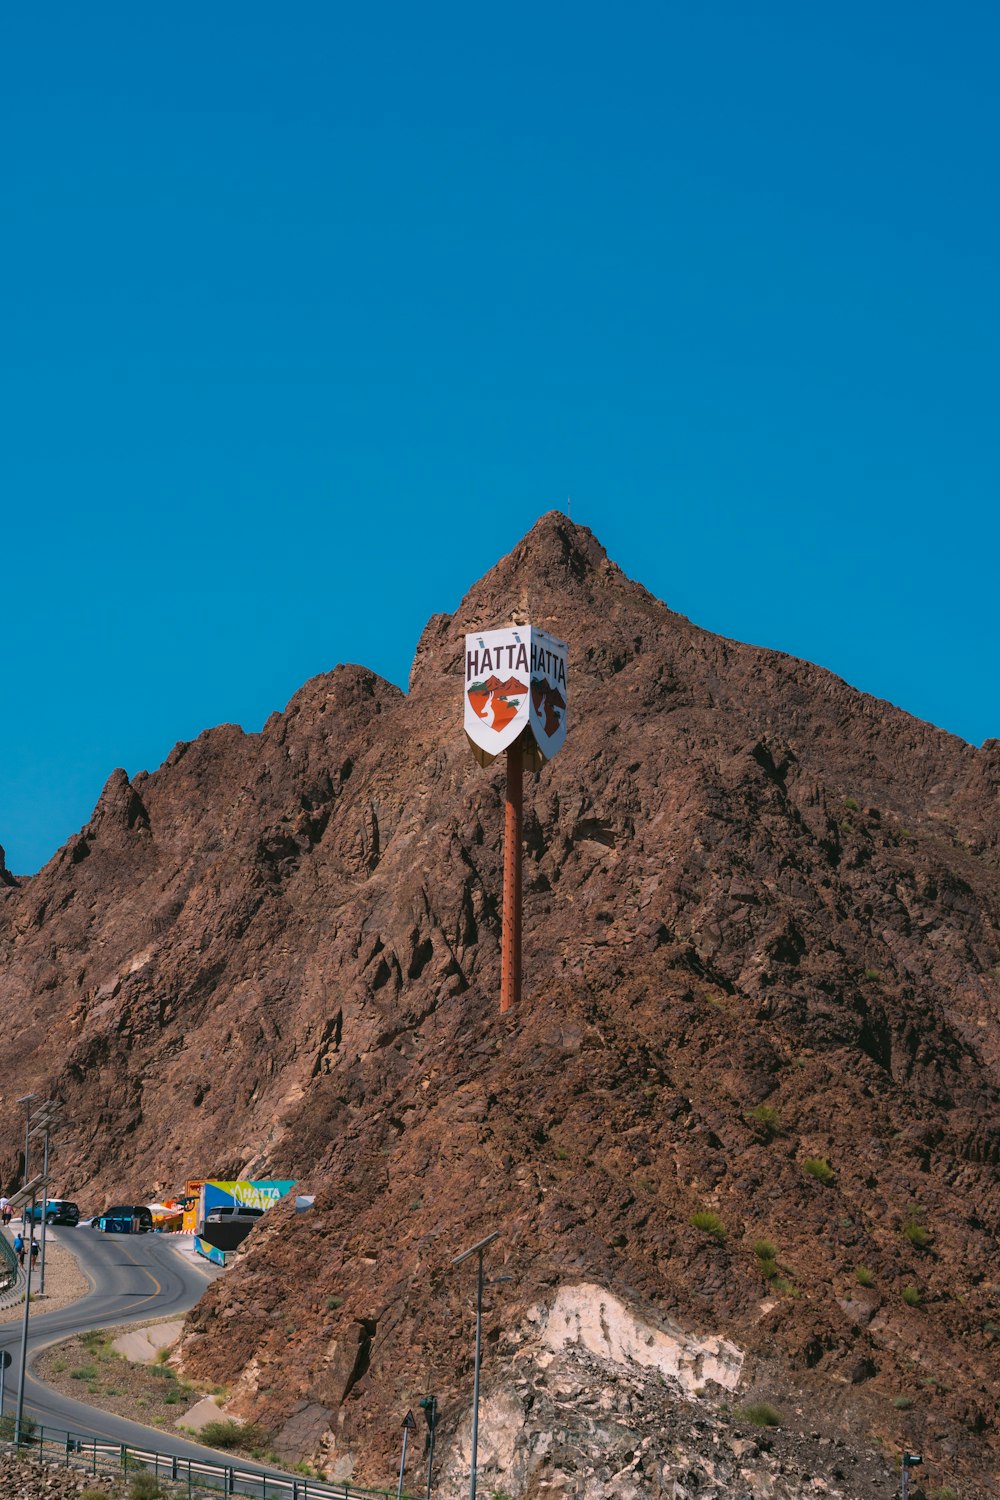 a sign on a pole in front of a mountain